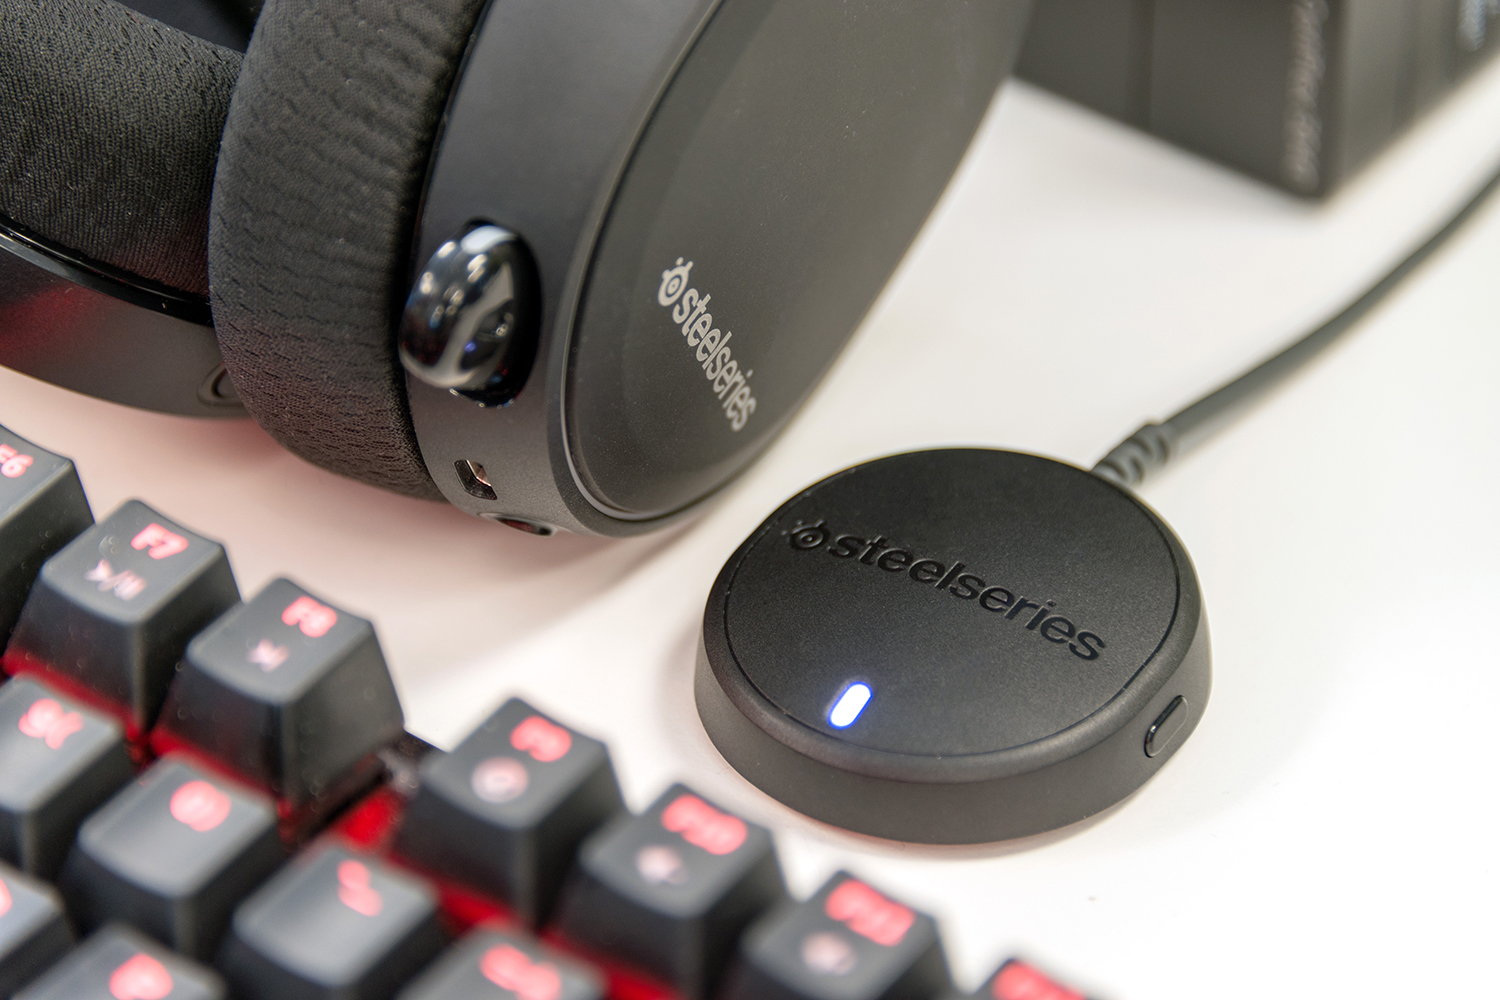 SteelSeries 7+ Review: Affordable and Highly Adaptable Sound